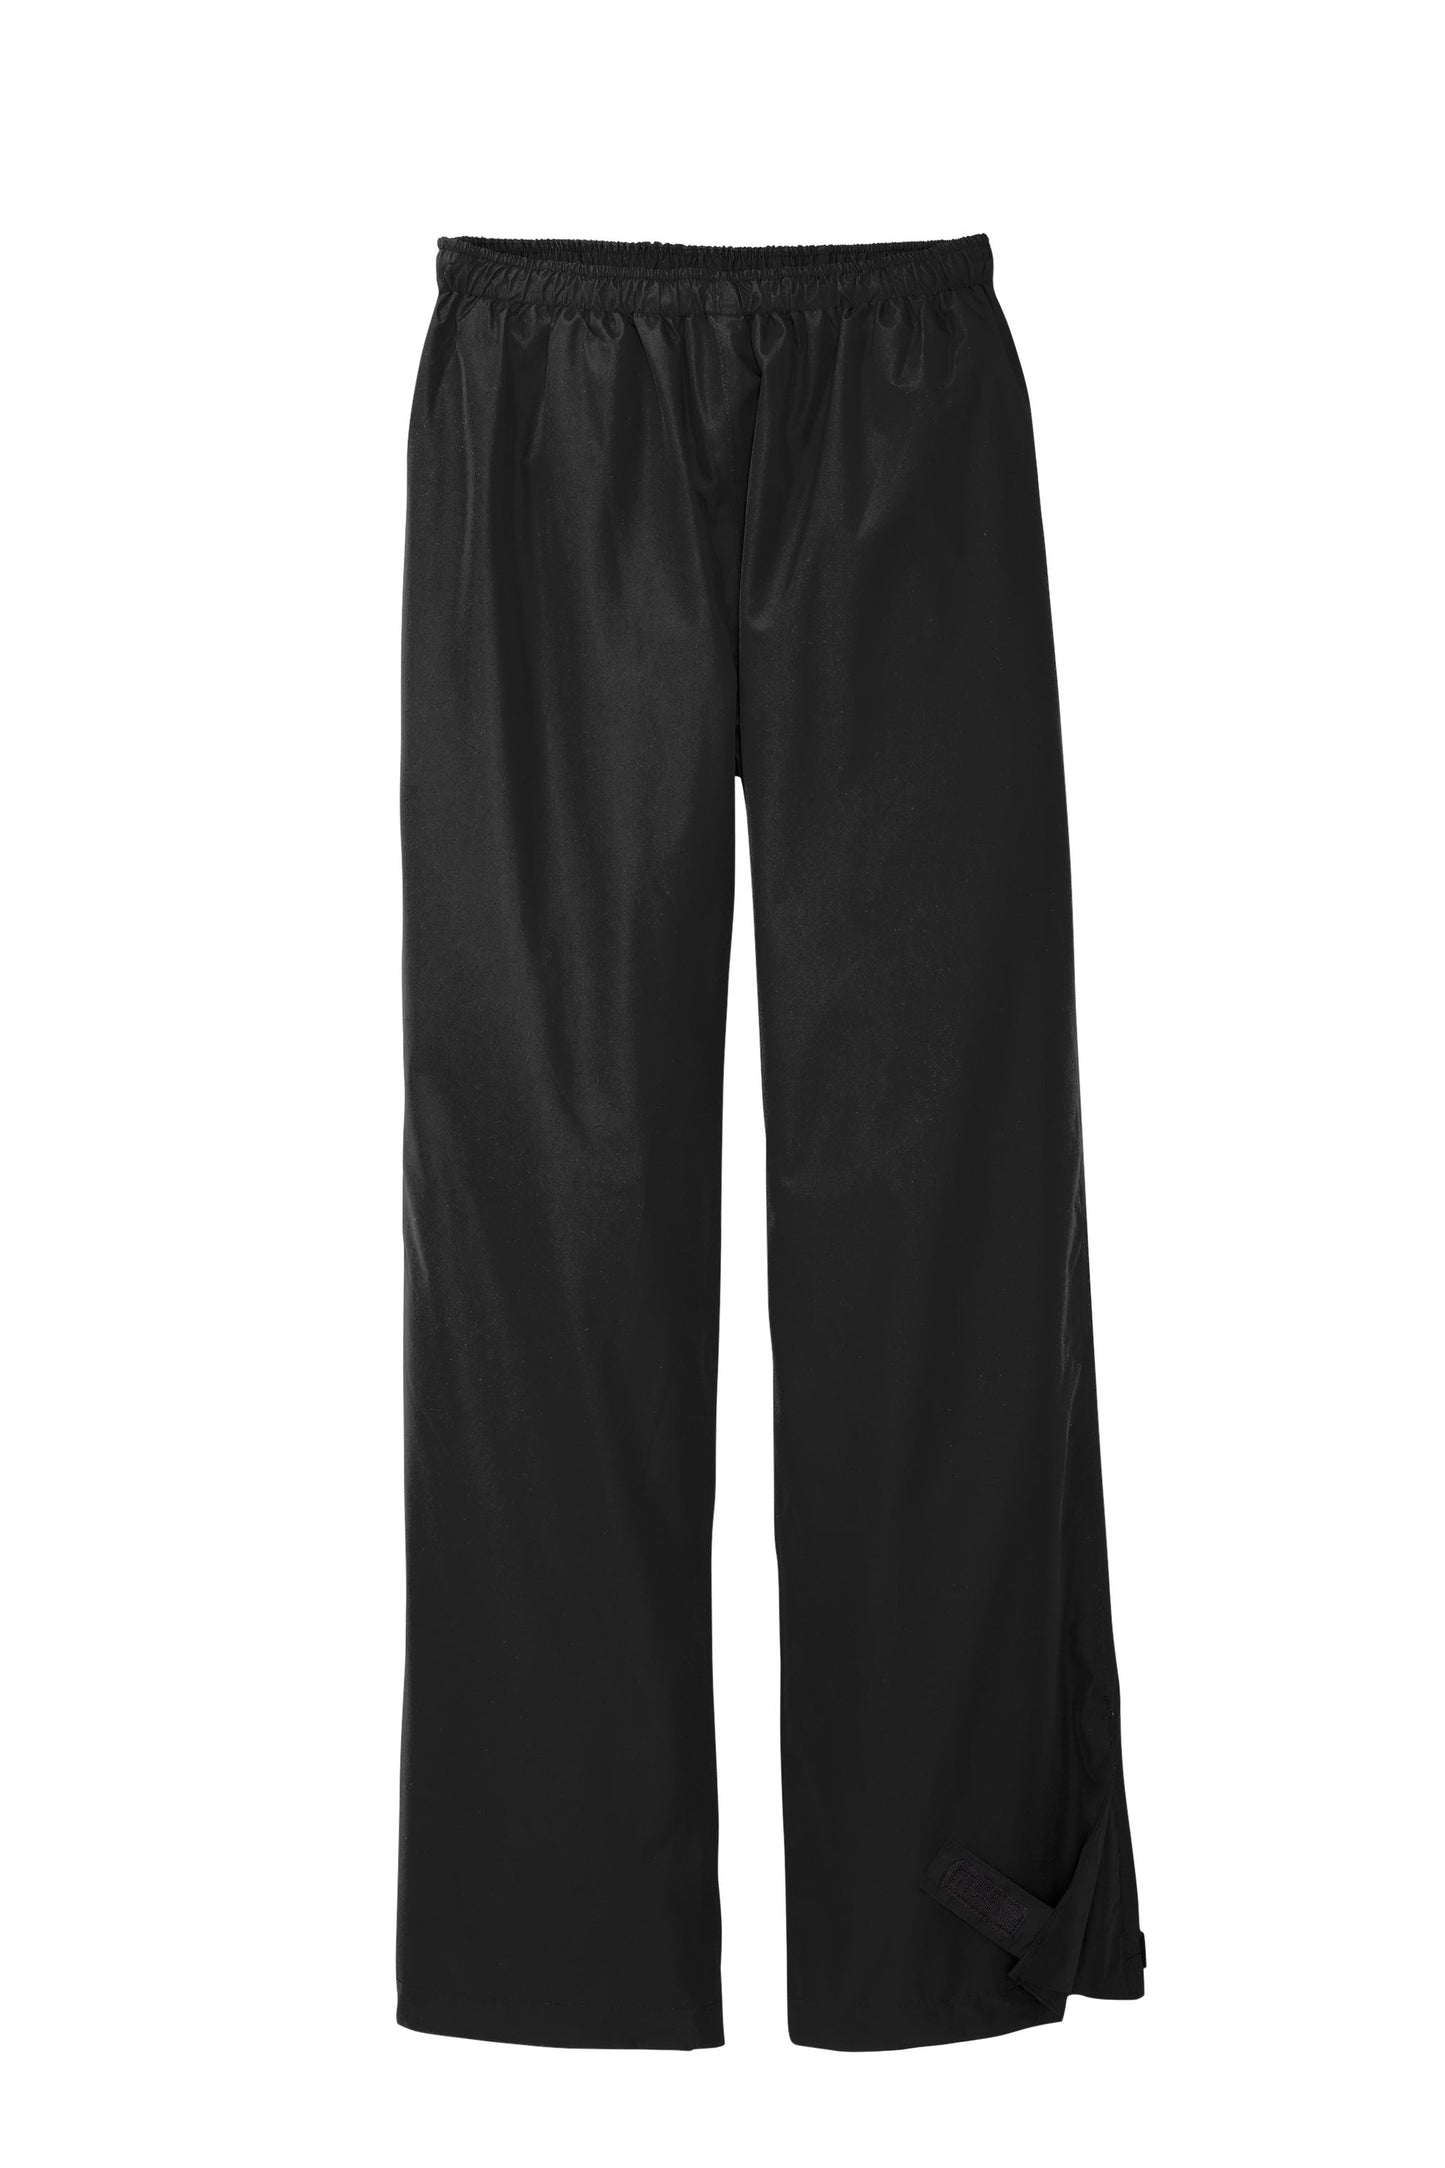 Port Authority Torrent Waterproof Pant, Product